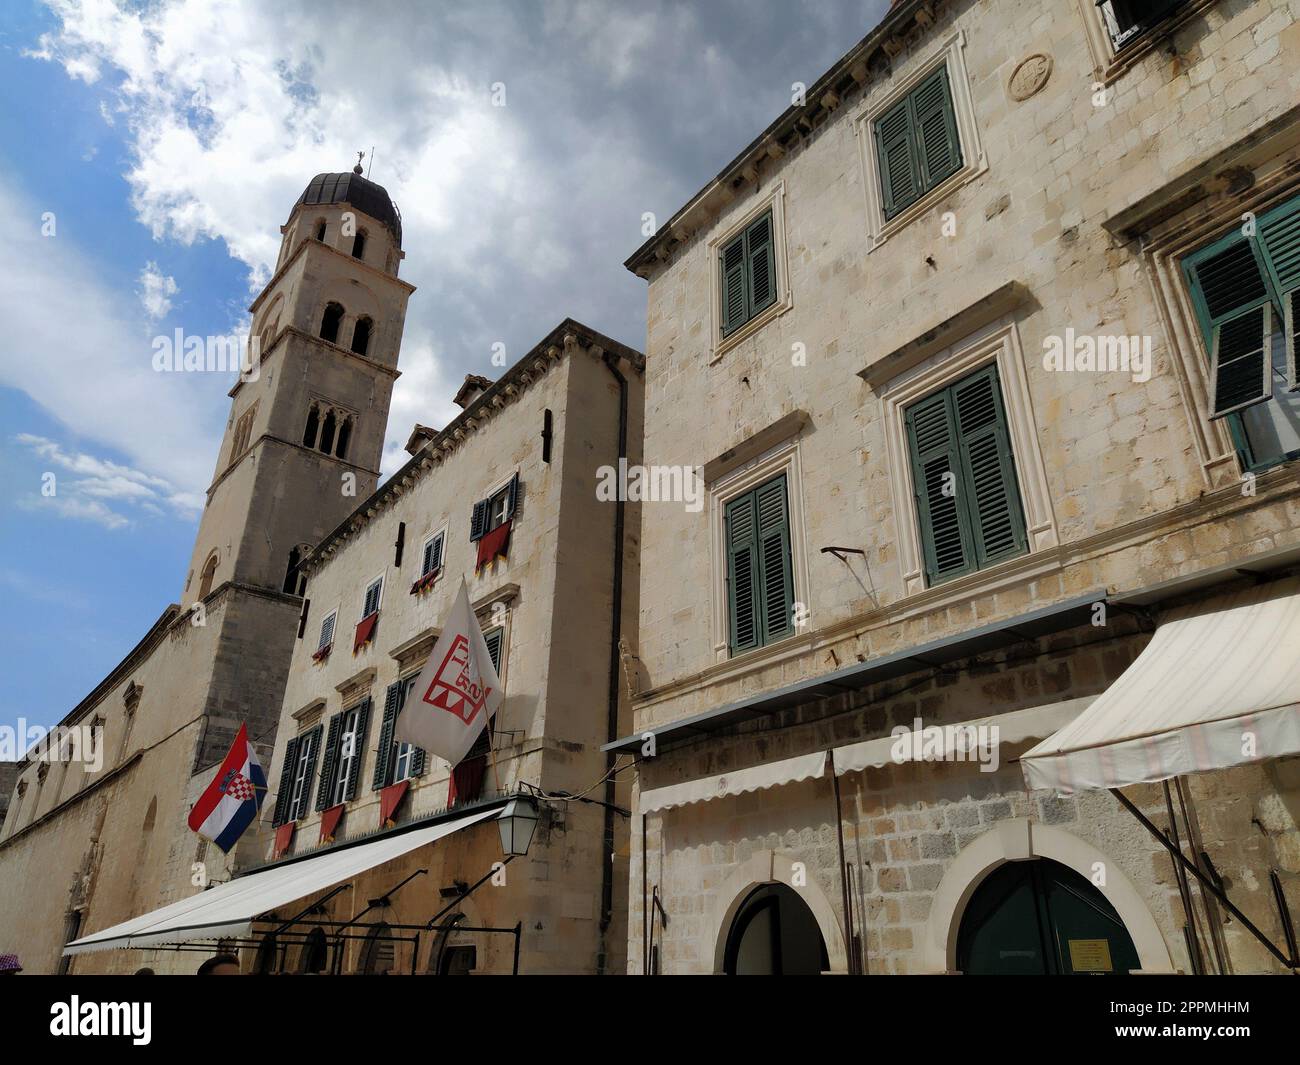 Stradun, Stradone is the main street of the historic city center of Dubrovnik in Croatia. architectural sights. A popular place for tourist walks. August 14, 2022 Tower and facades of ancient houses. Stock Photo